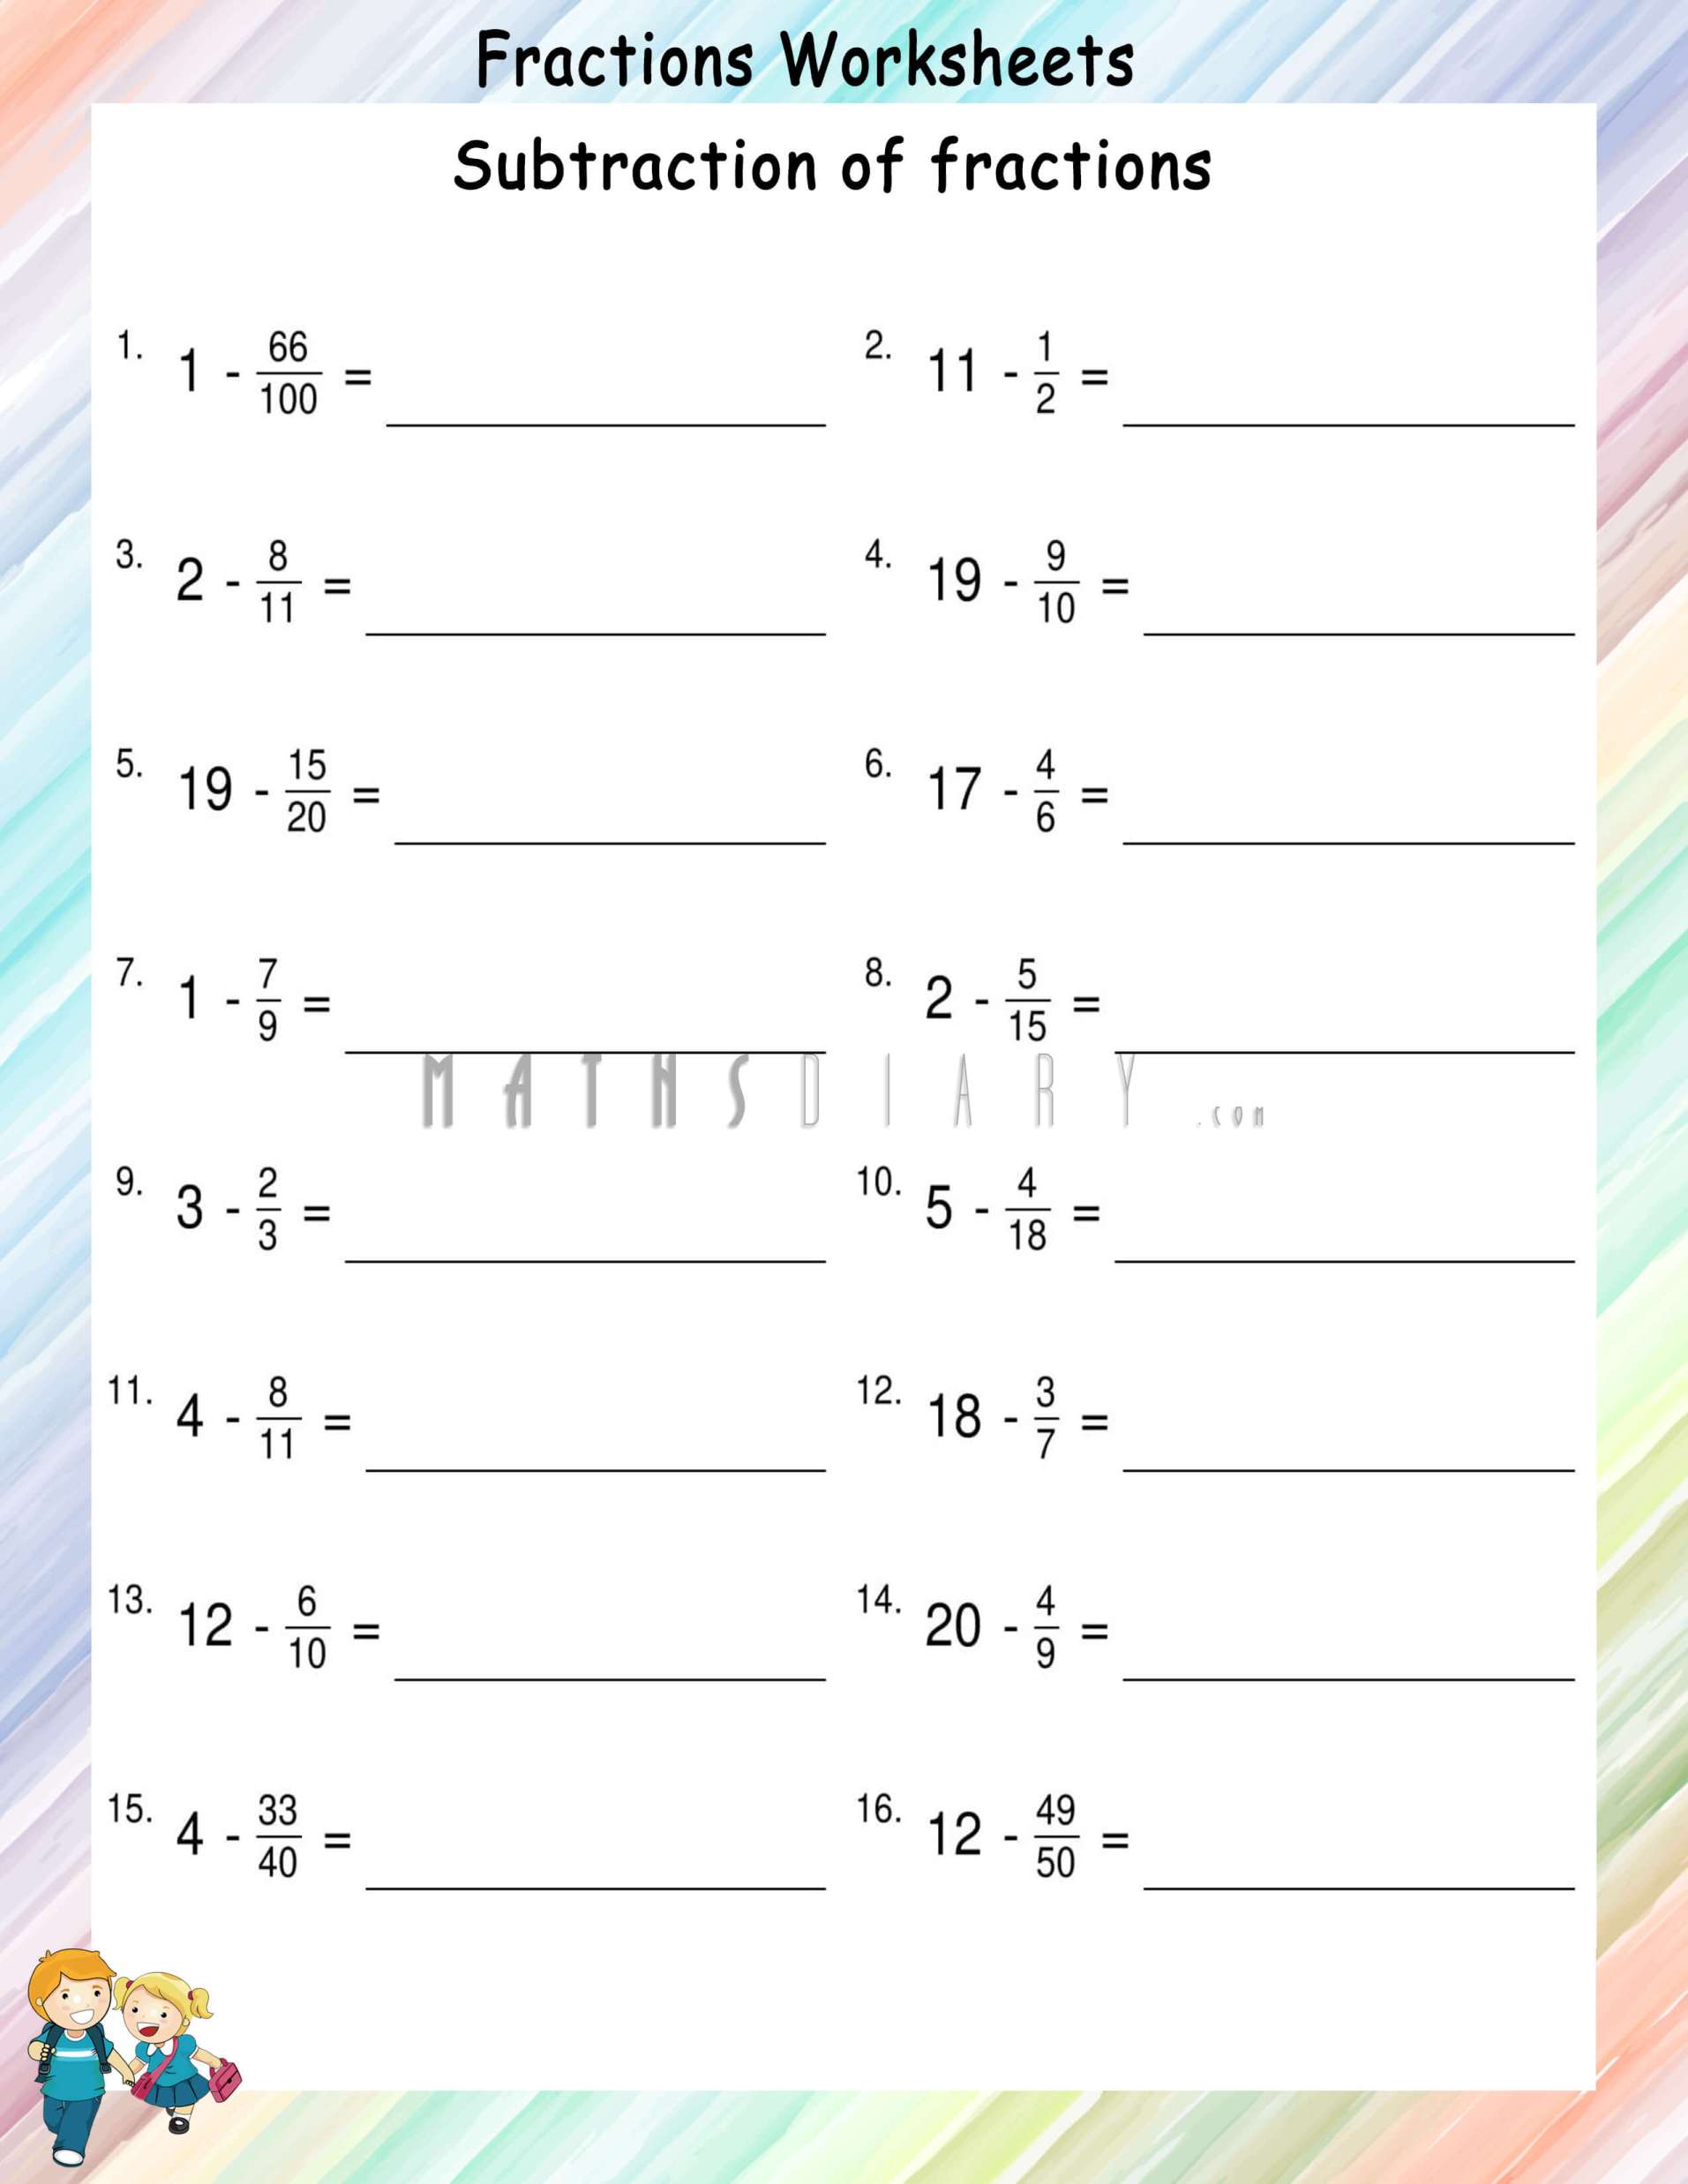 multiply-a-fraction-by-a-whole-number-worksheet